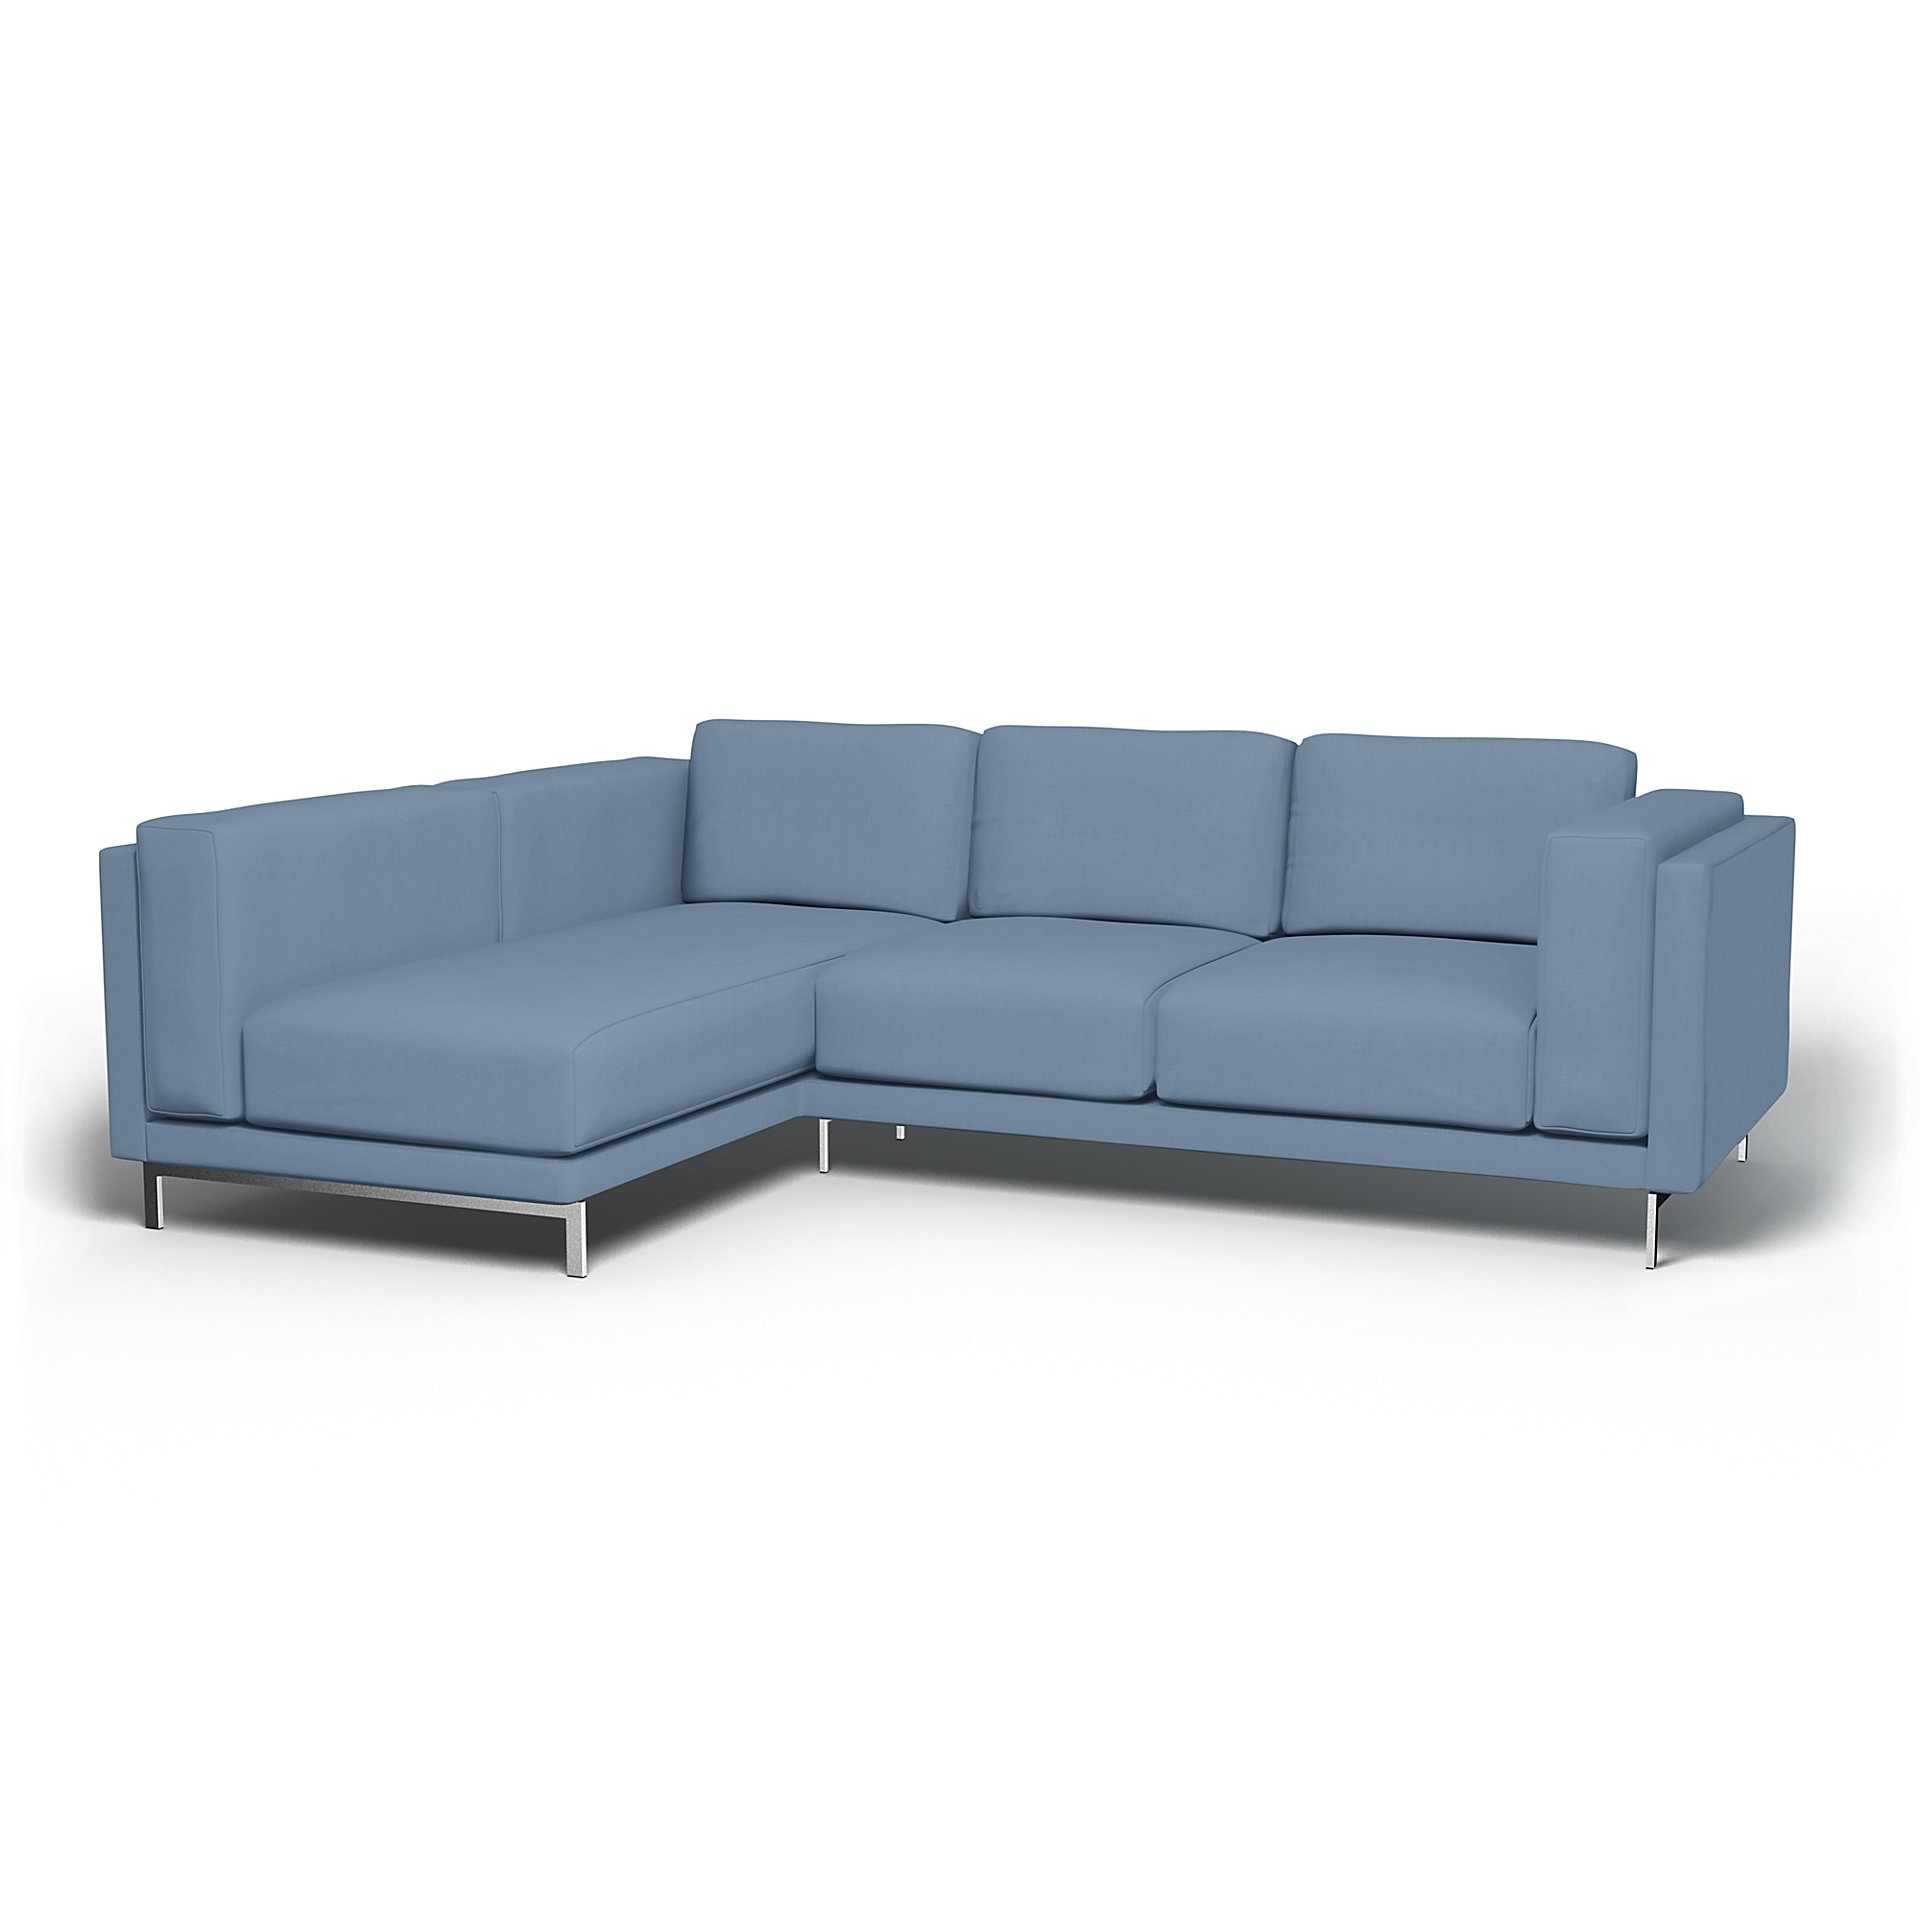 IKEA - Nockeby 3 Seater Sofa with Left Chaise Cover, Dusty Blue, Cotton - Bemz